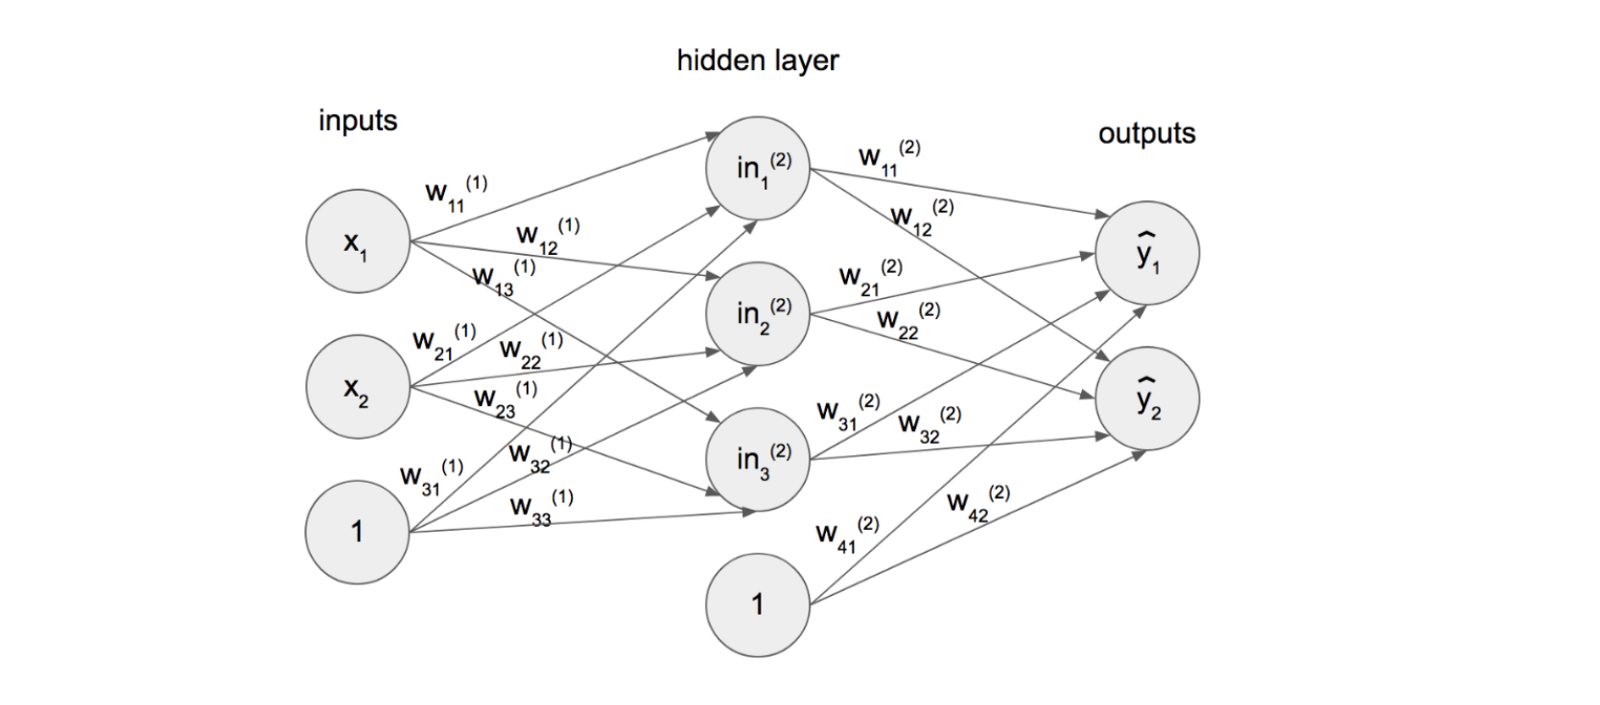 Let me introduce you to neural networks